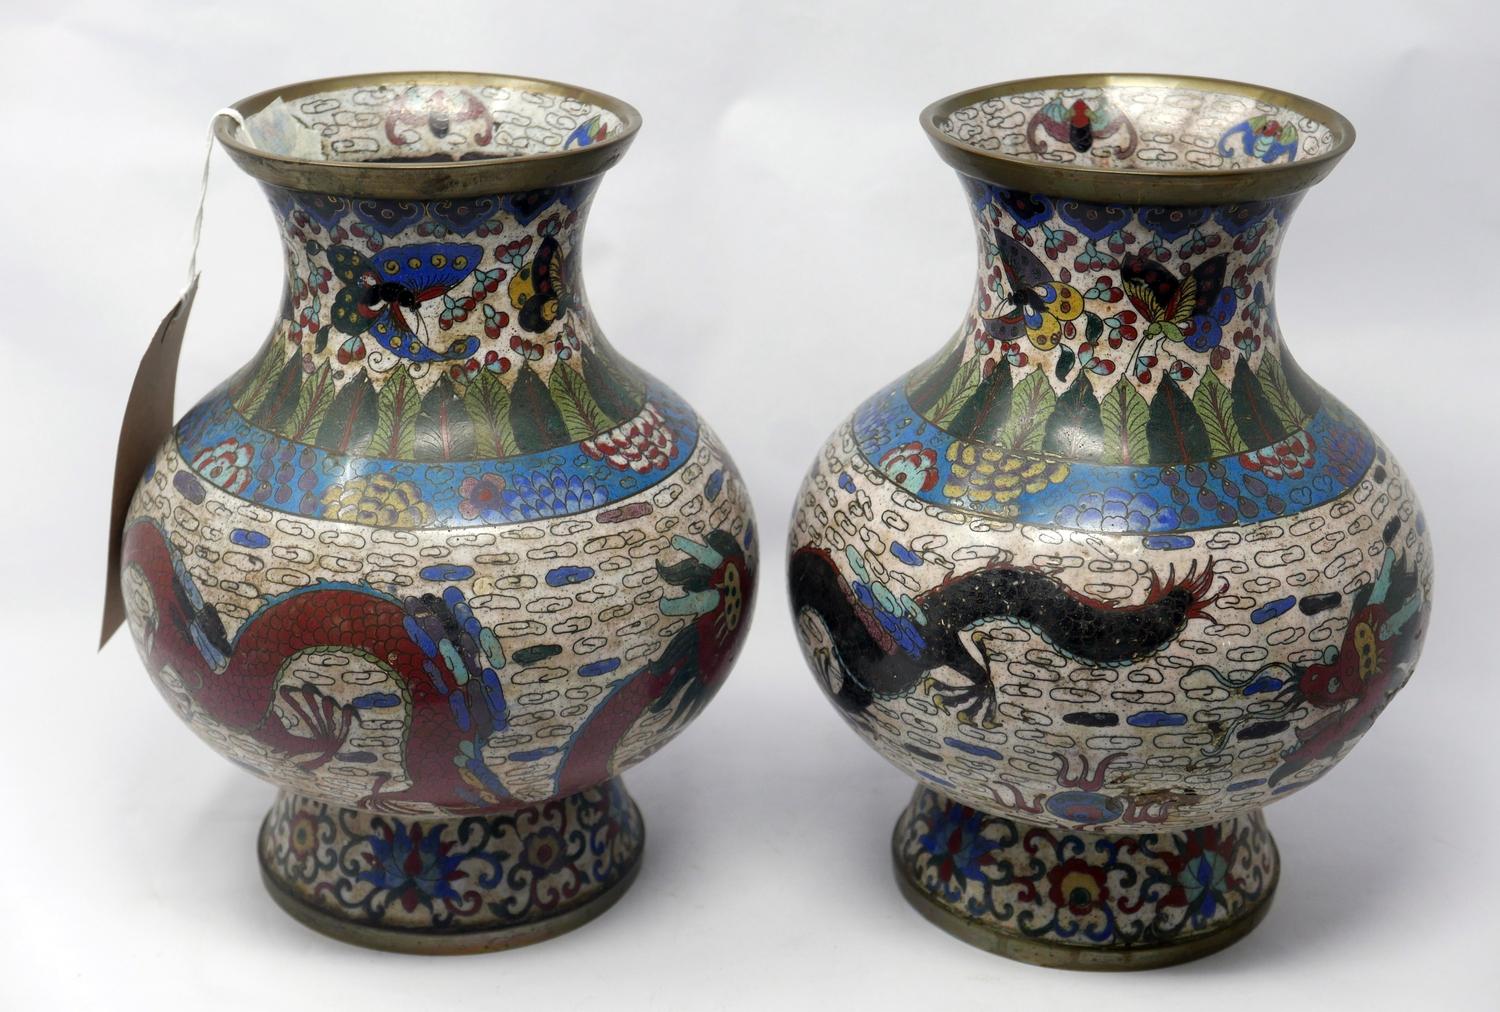 A pair of 19th century Chinese brass cloisonne vases, decorated with dragons chasing flaming